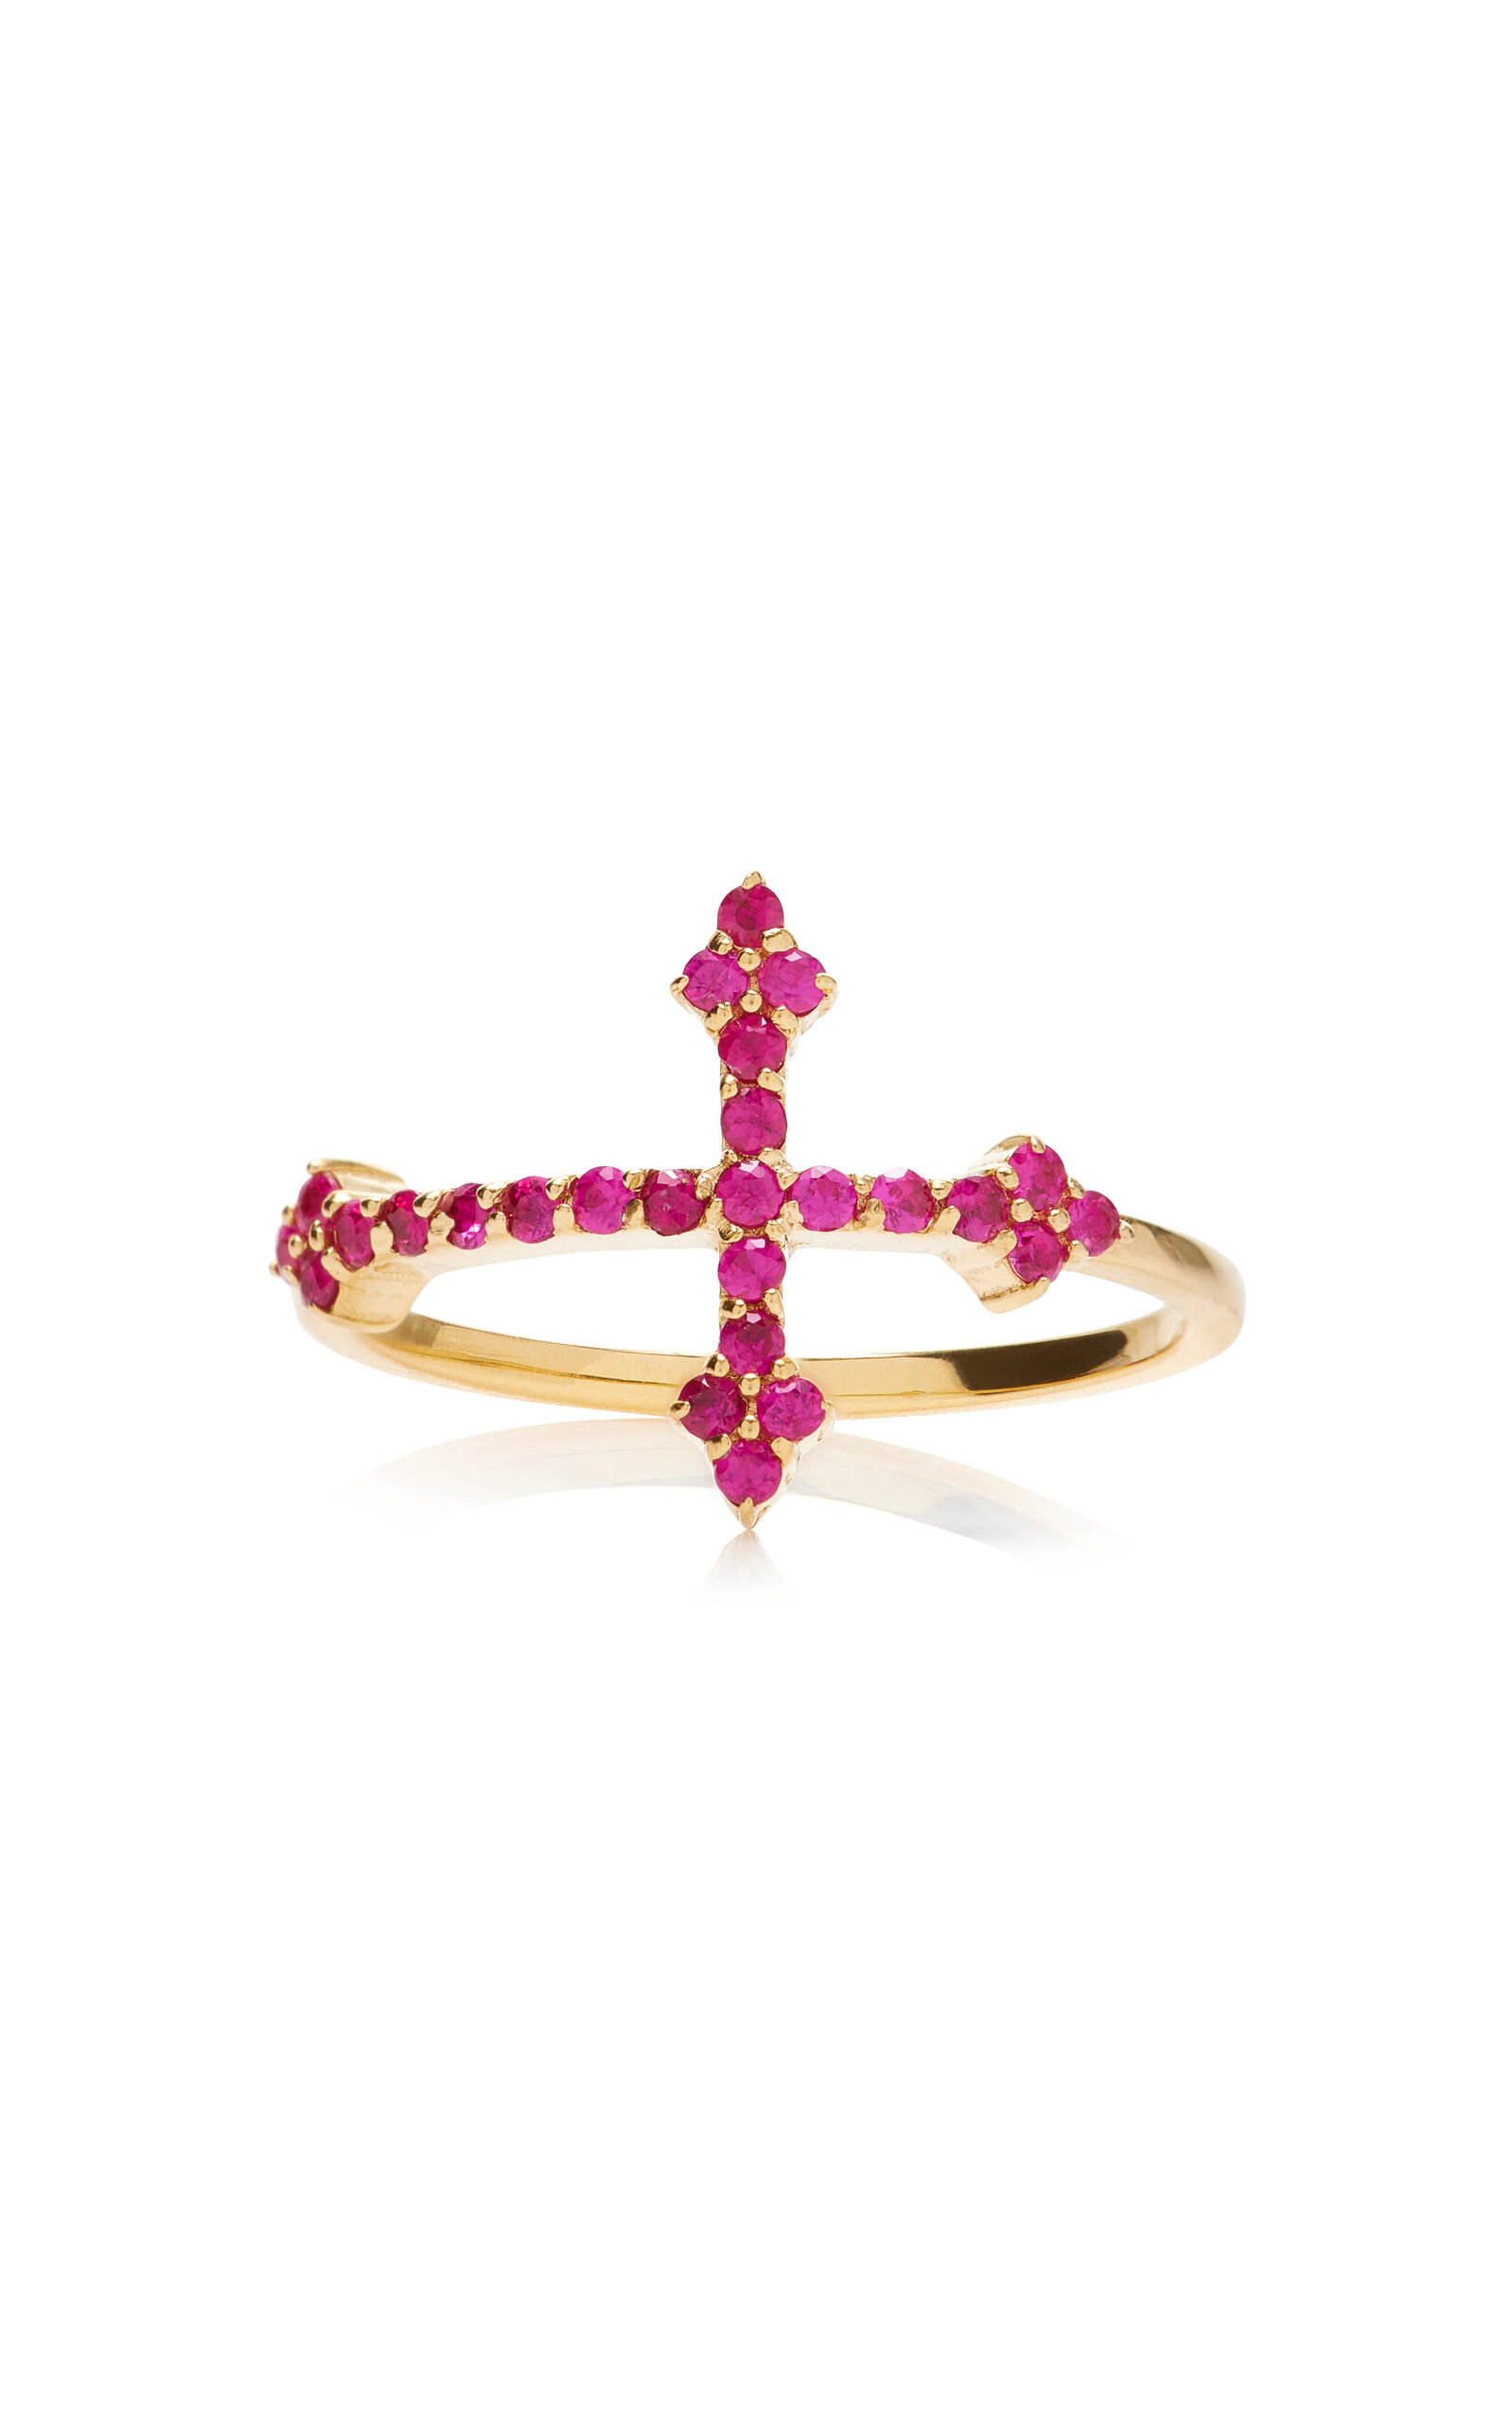 Cross Your Fingers 14K Yellow Gold Ruby Ring